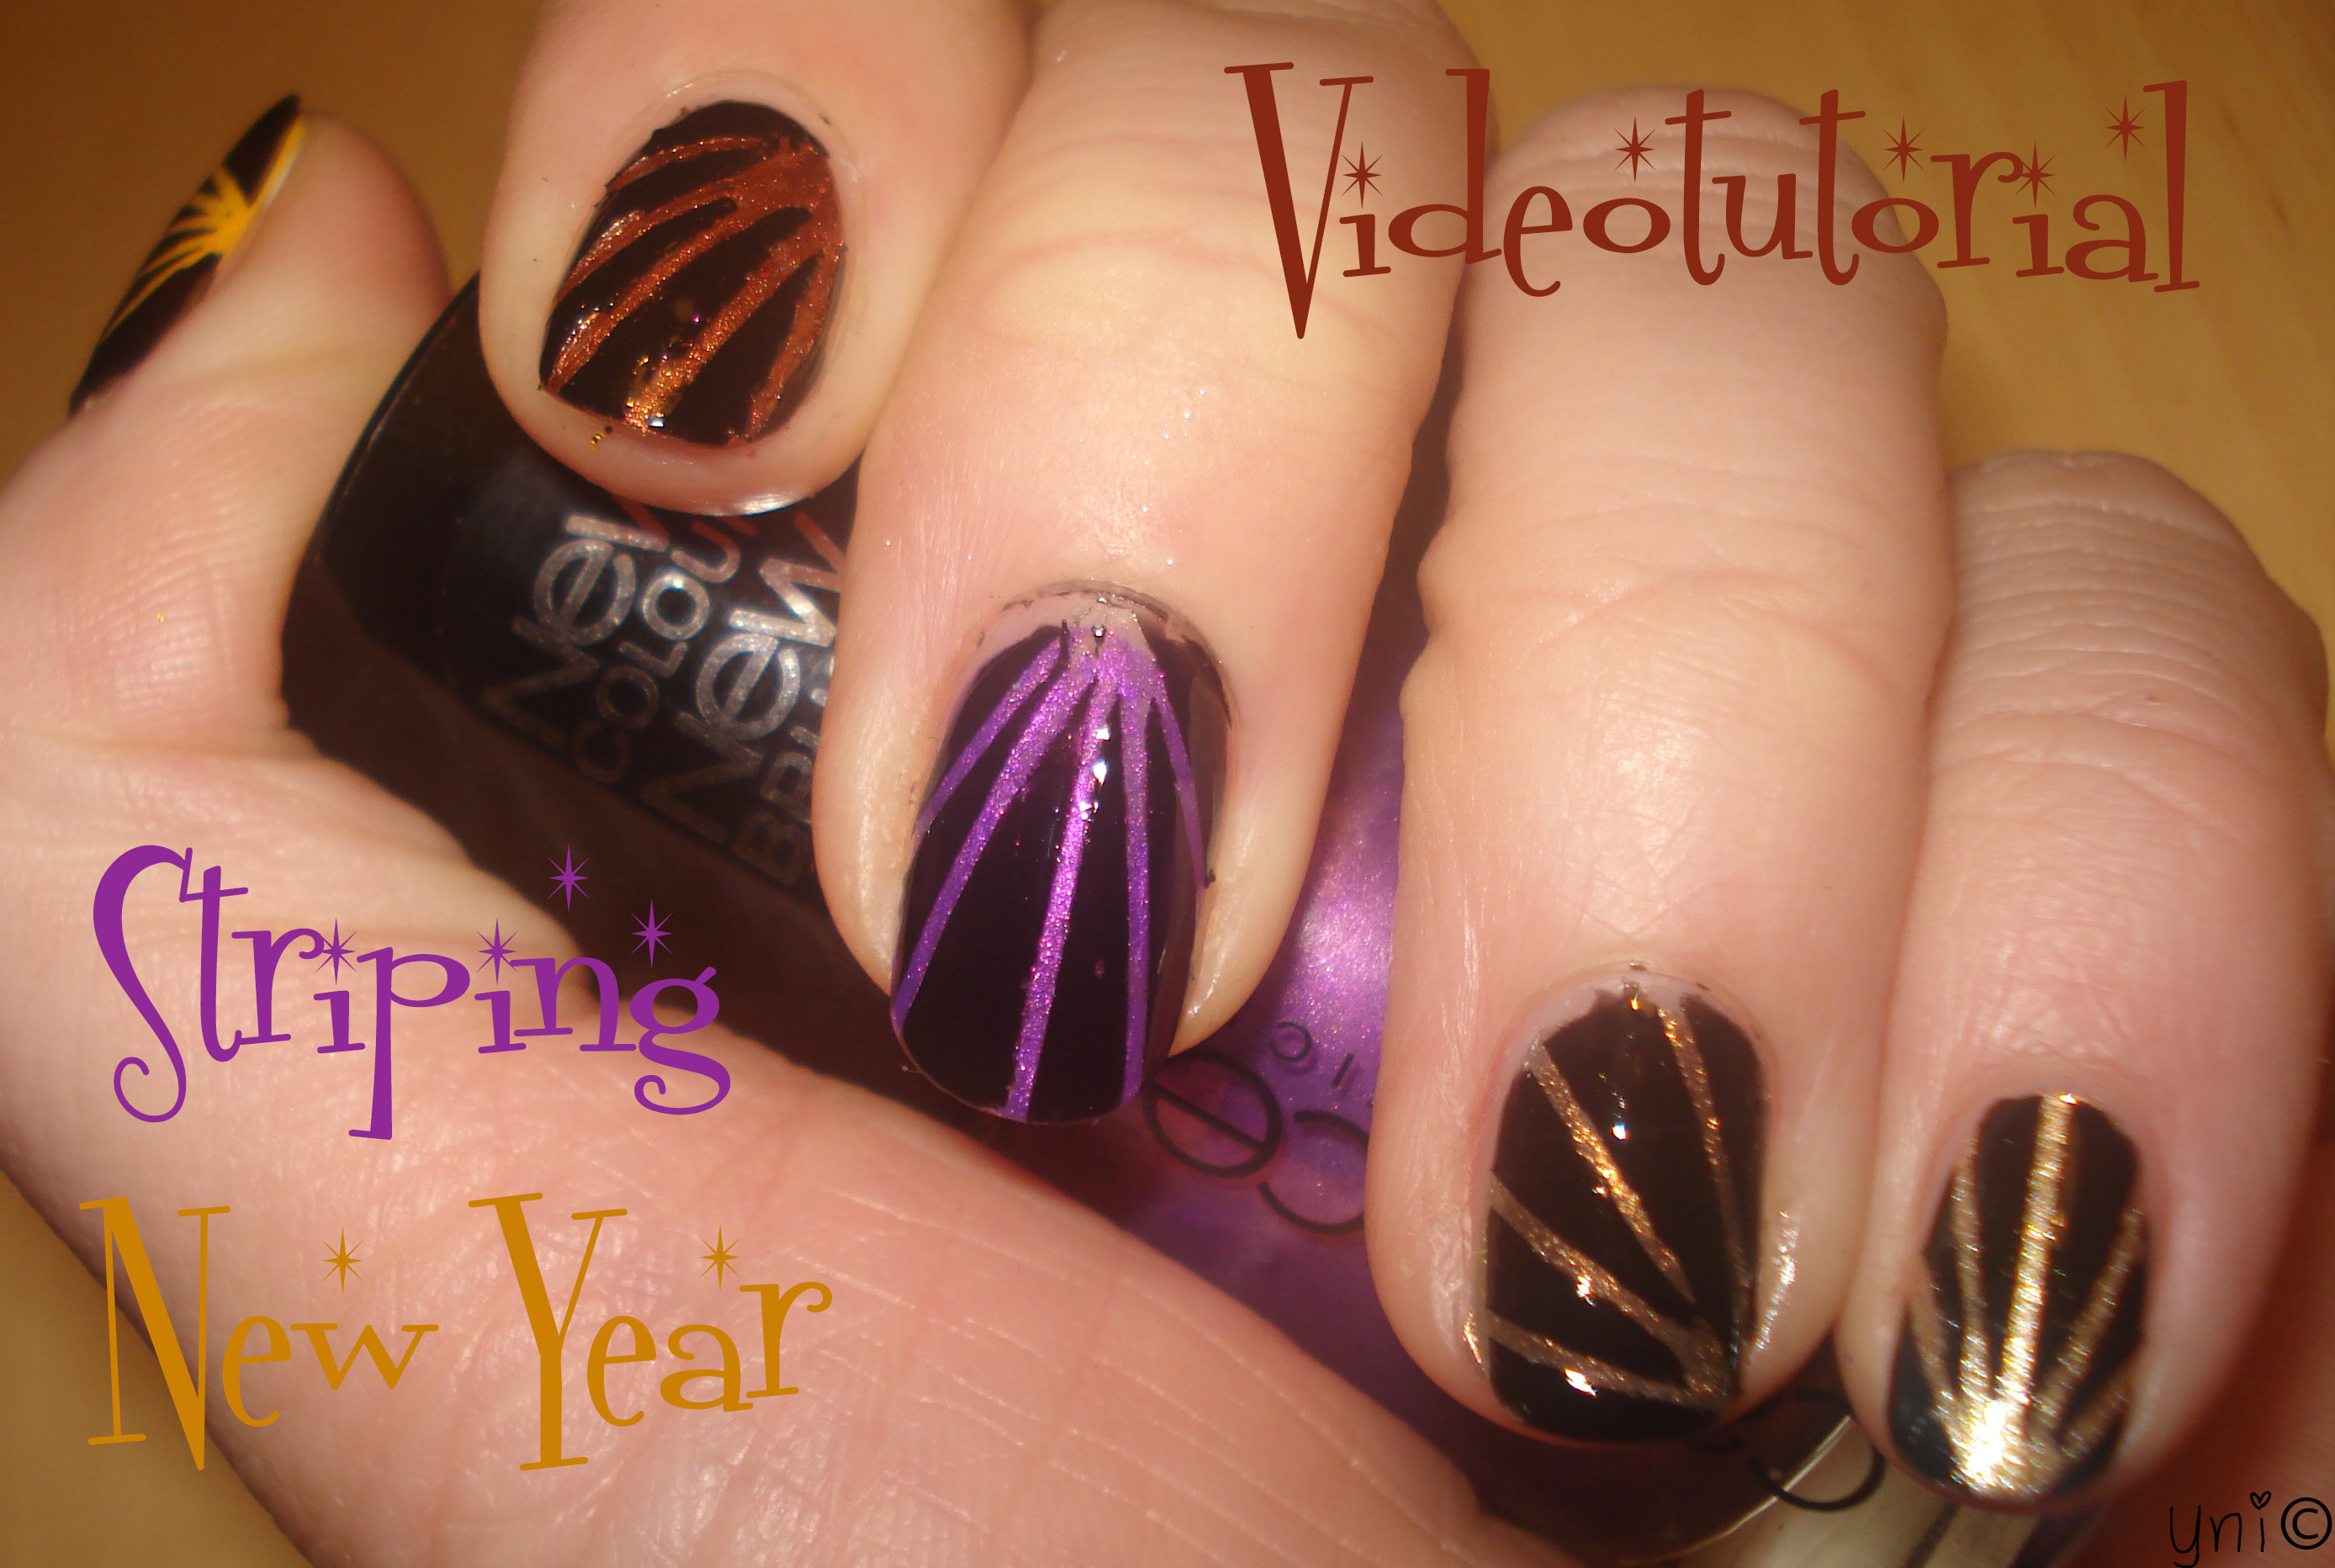 Videotutorial: Striping New Year!